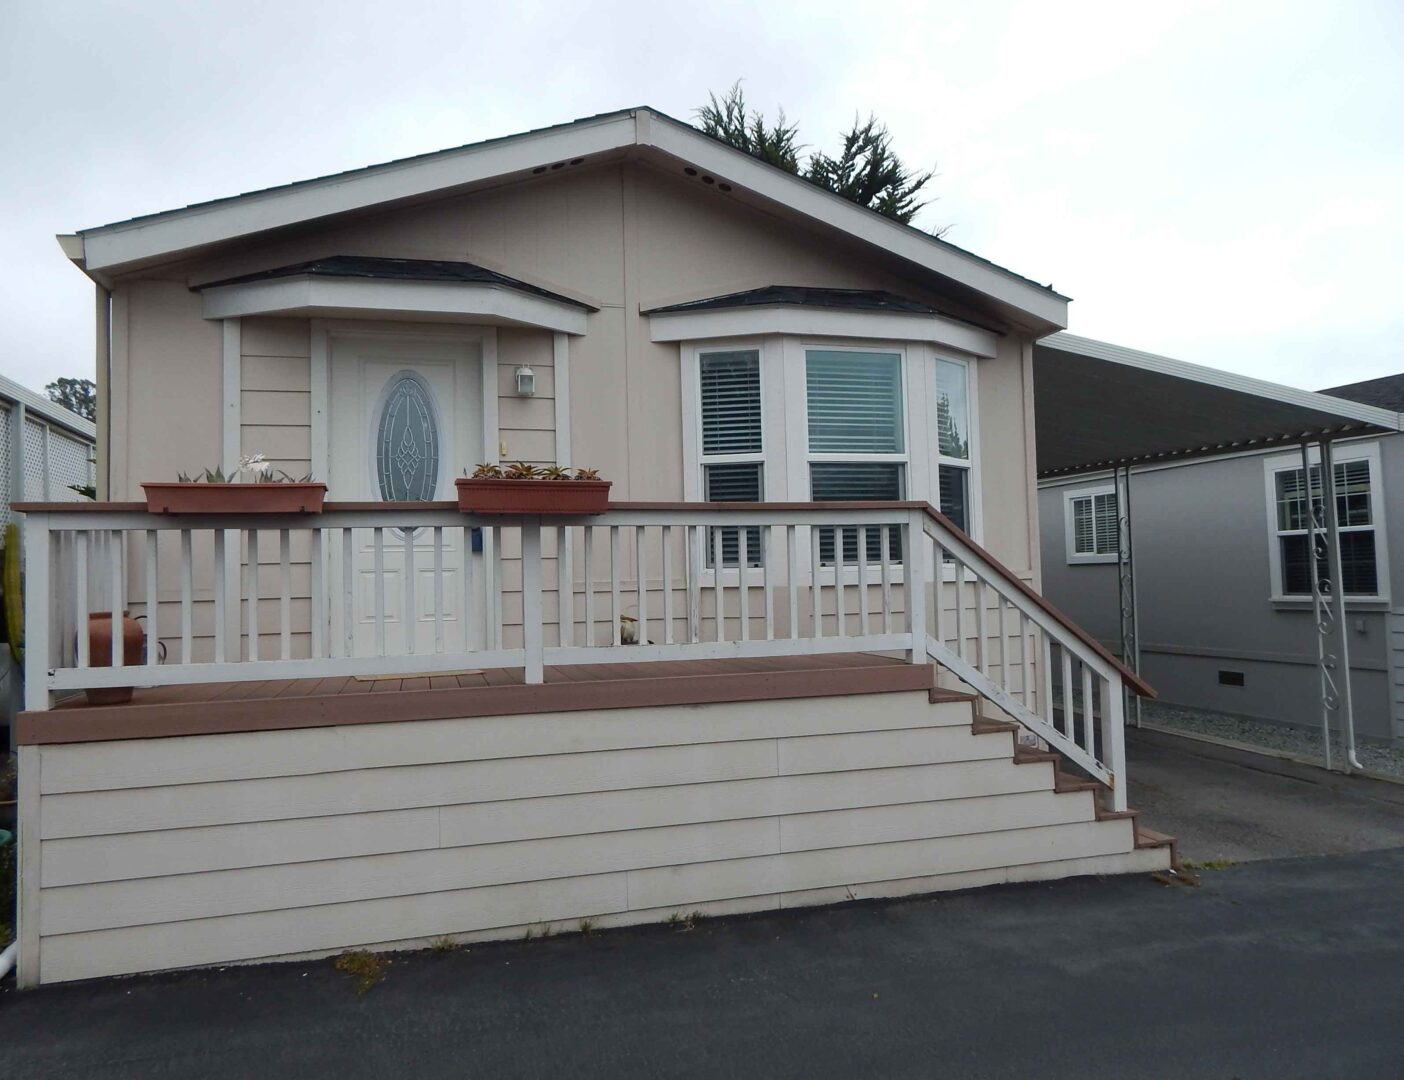   Manufactured home with beige and brown exteriors